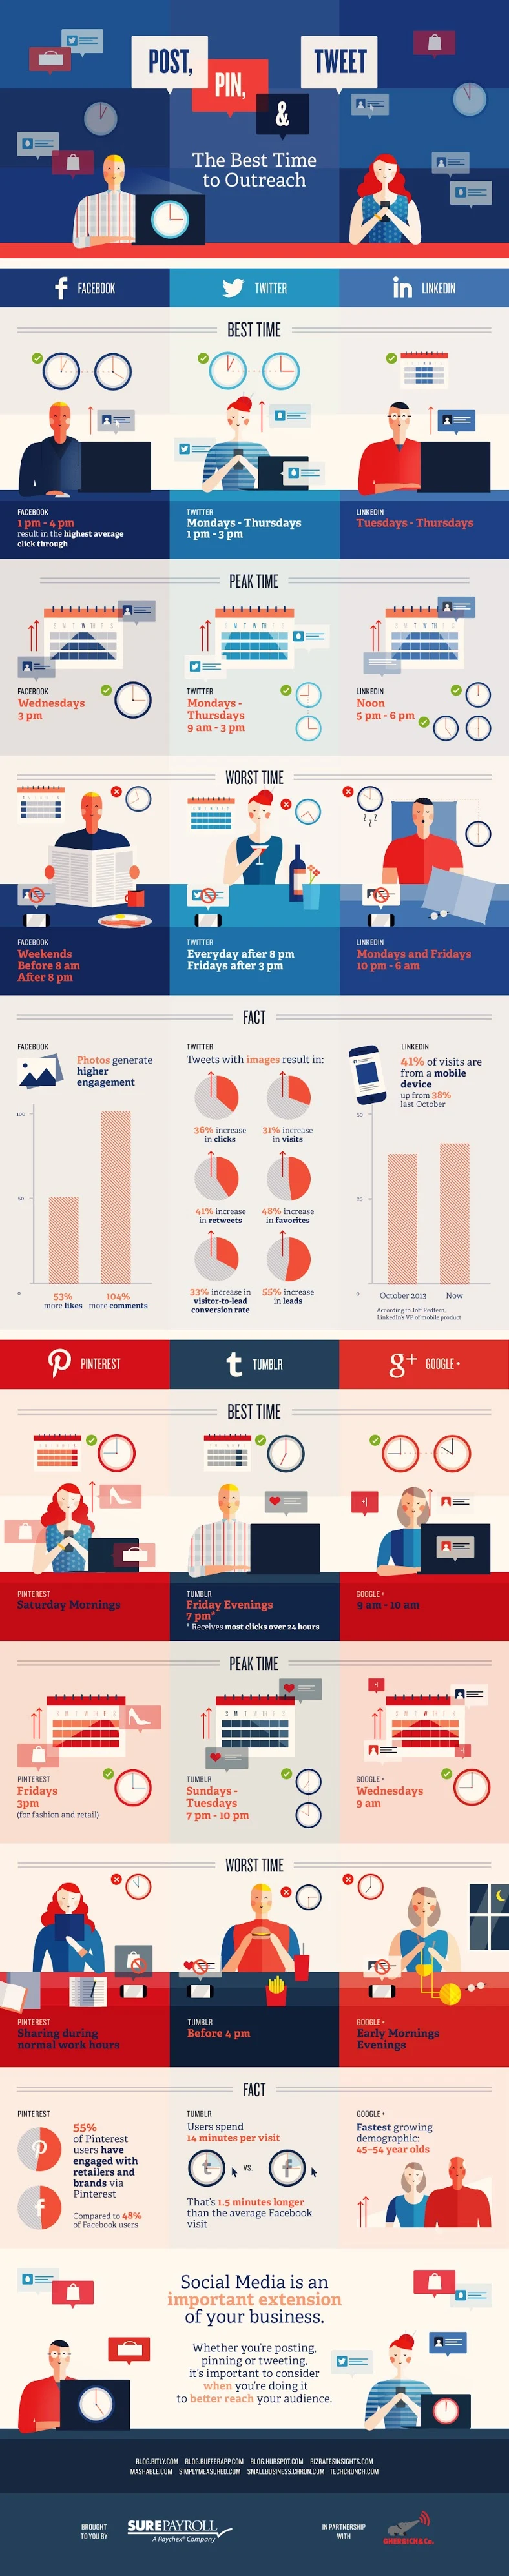 The Best and Worst Times to Post, Pin & Tweet - #infographic #Socialmedia